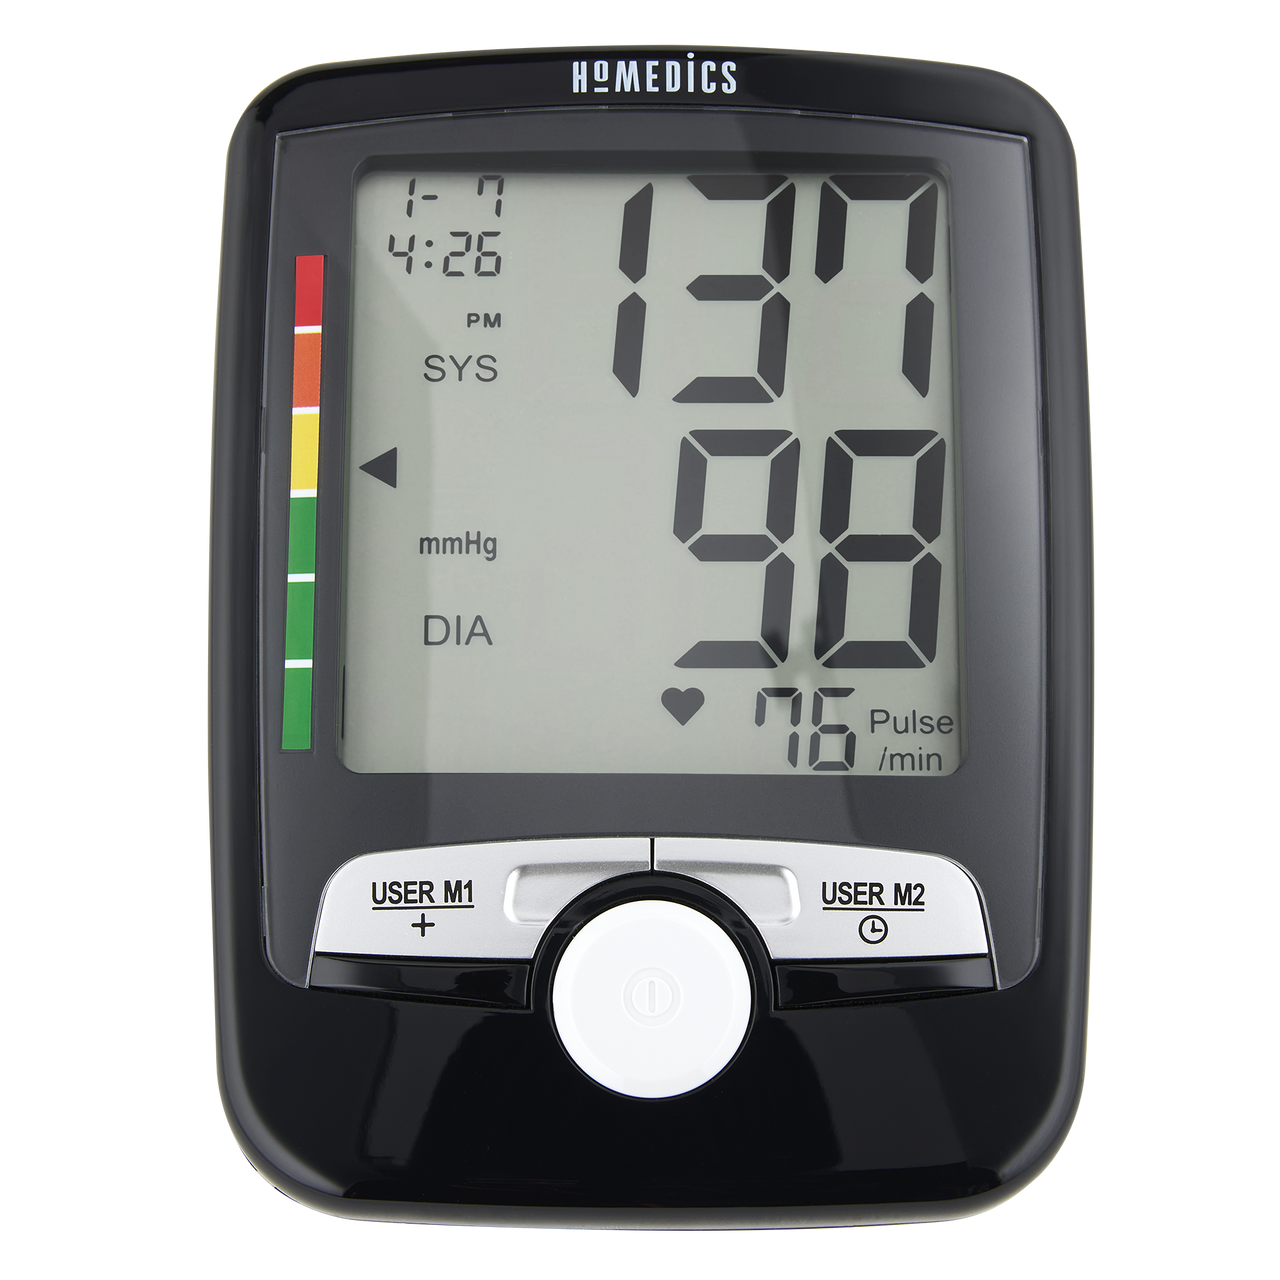 Automatic Arm Blood Pressure Monitor with Smart Measure Technology -  Homedics